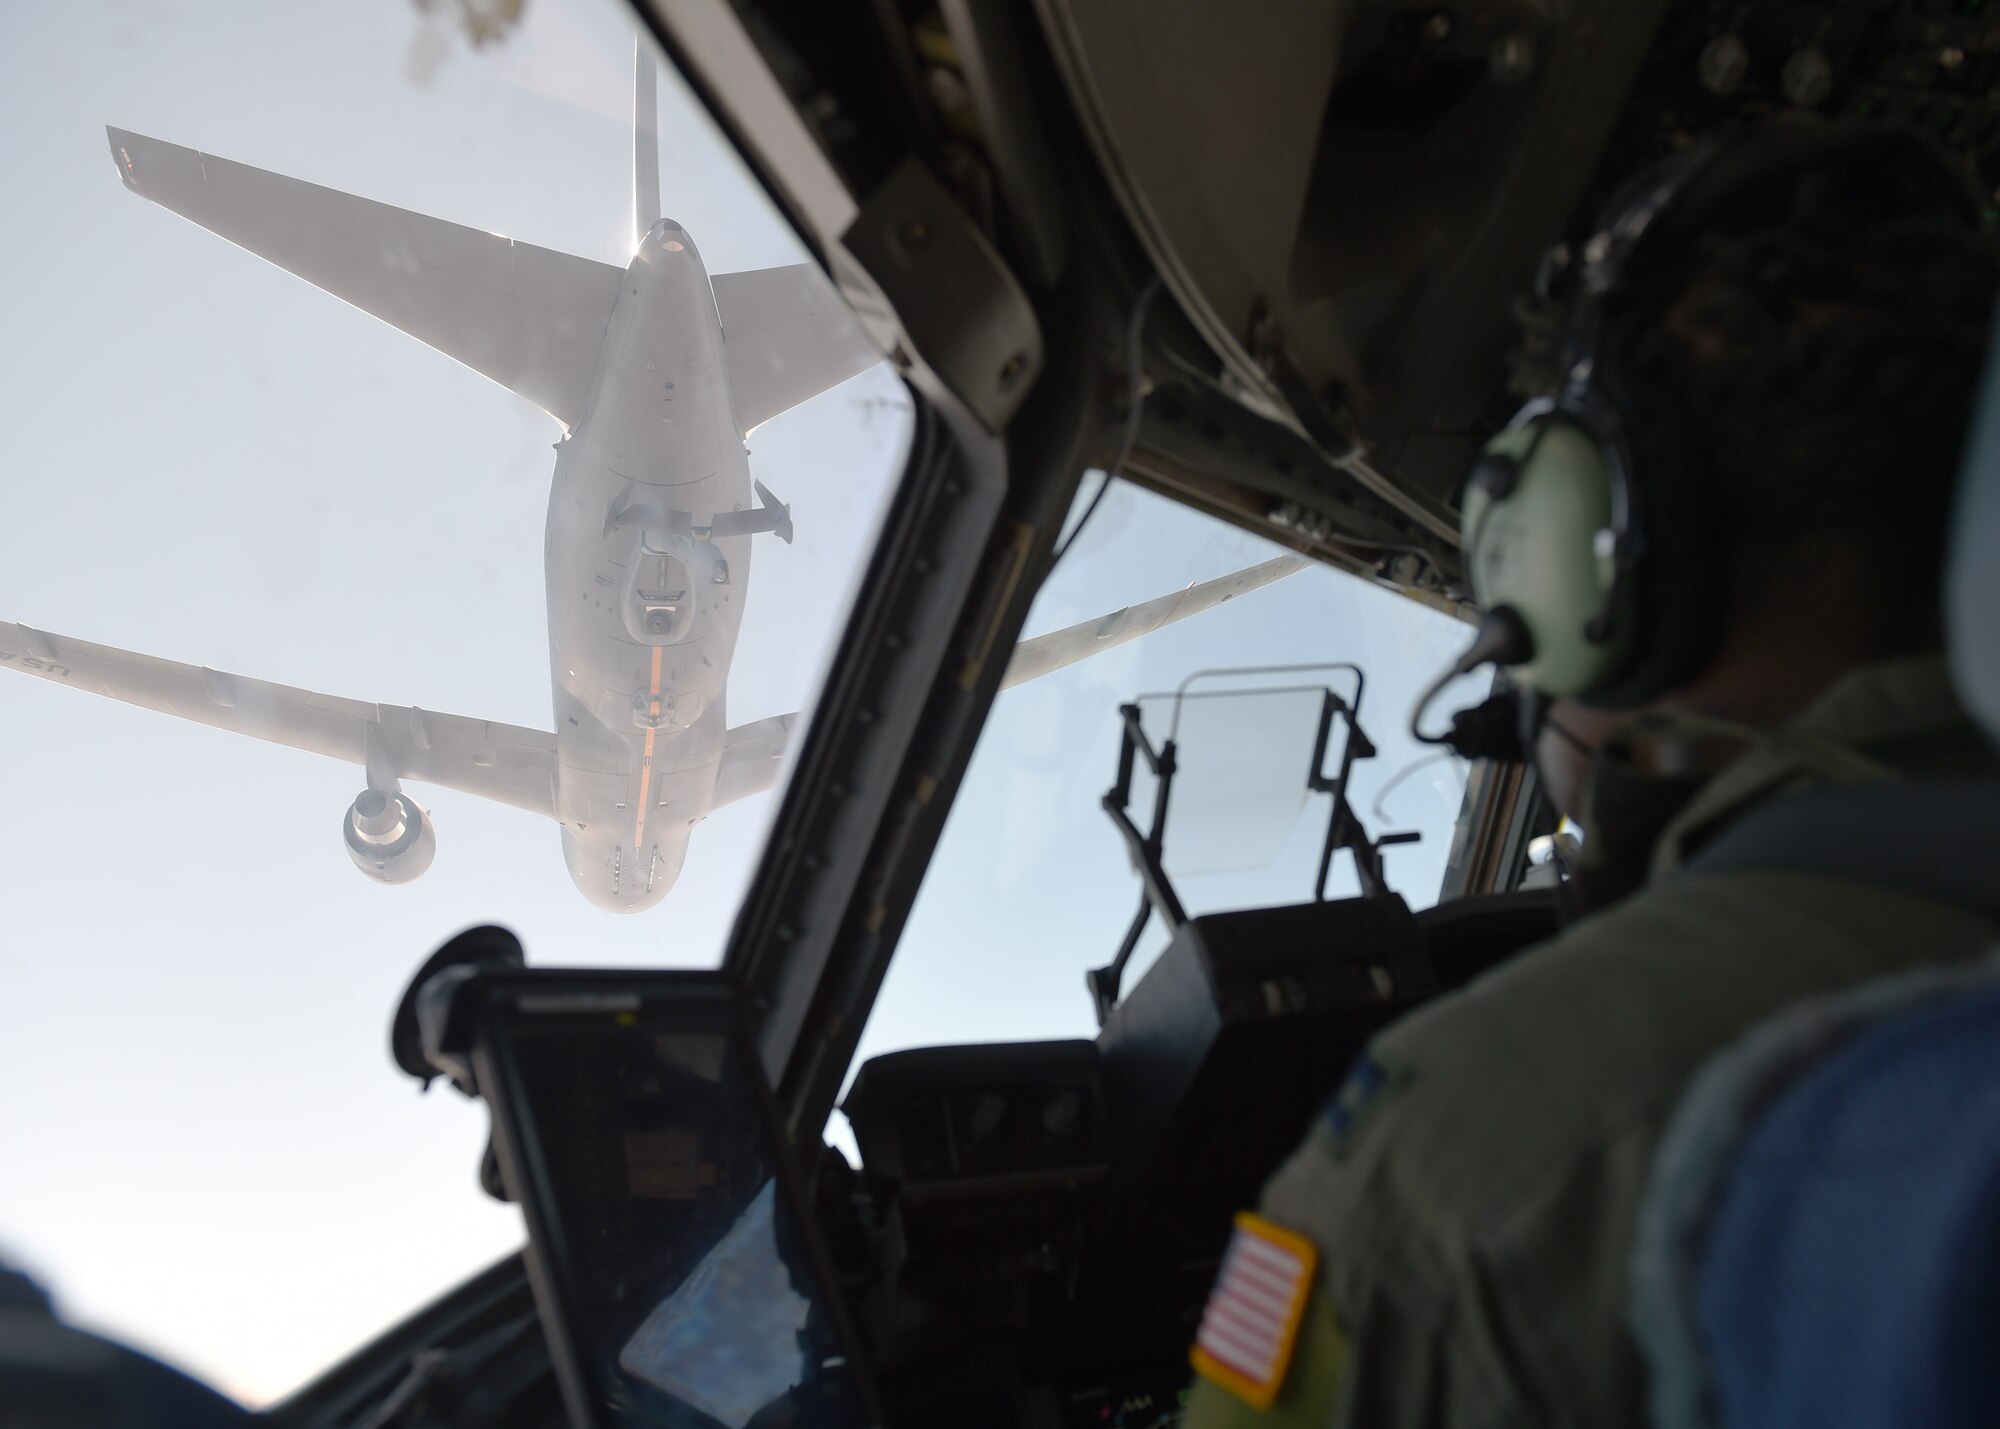 Capt. Edmond Duvall, 7th Airlift Squadron pilot, prepares to aerial refuel a C-17 Globemaster III from a KC-46 Pegasus from Fairchild Air Force Base, Wash., over Washington, Aug. 5, 2020. The KC-46 Pegasus is the Air Force’s newest refueling aircraft and many pilots are still learning and being certified on how to conduct refueling.  (U.S. Air Force photo by Airman 1st Class Mikayla Heineck)